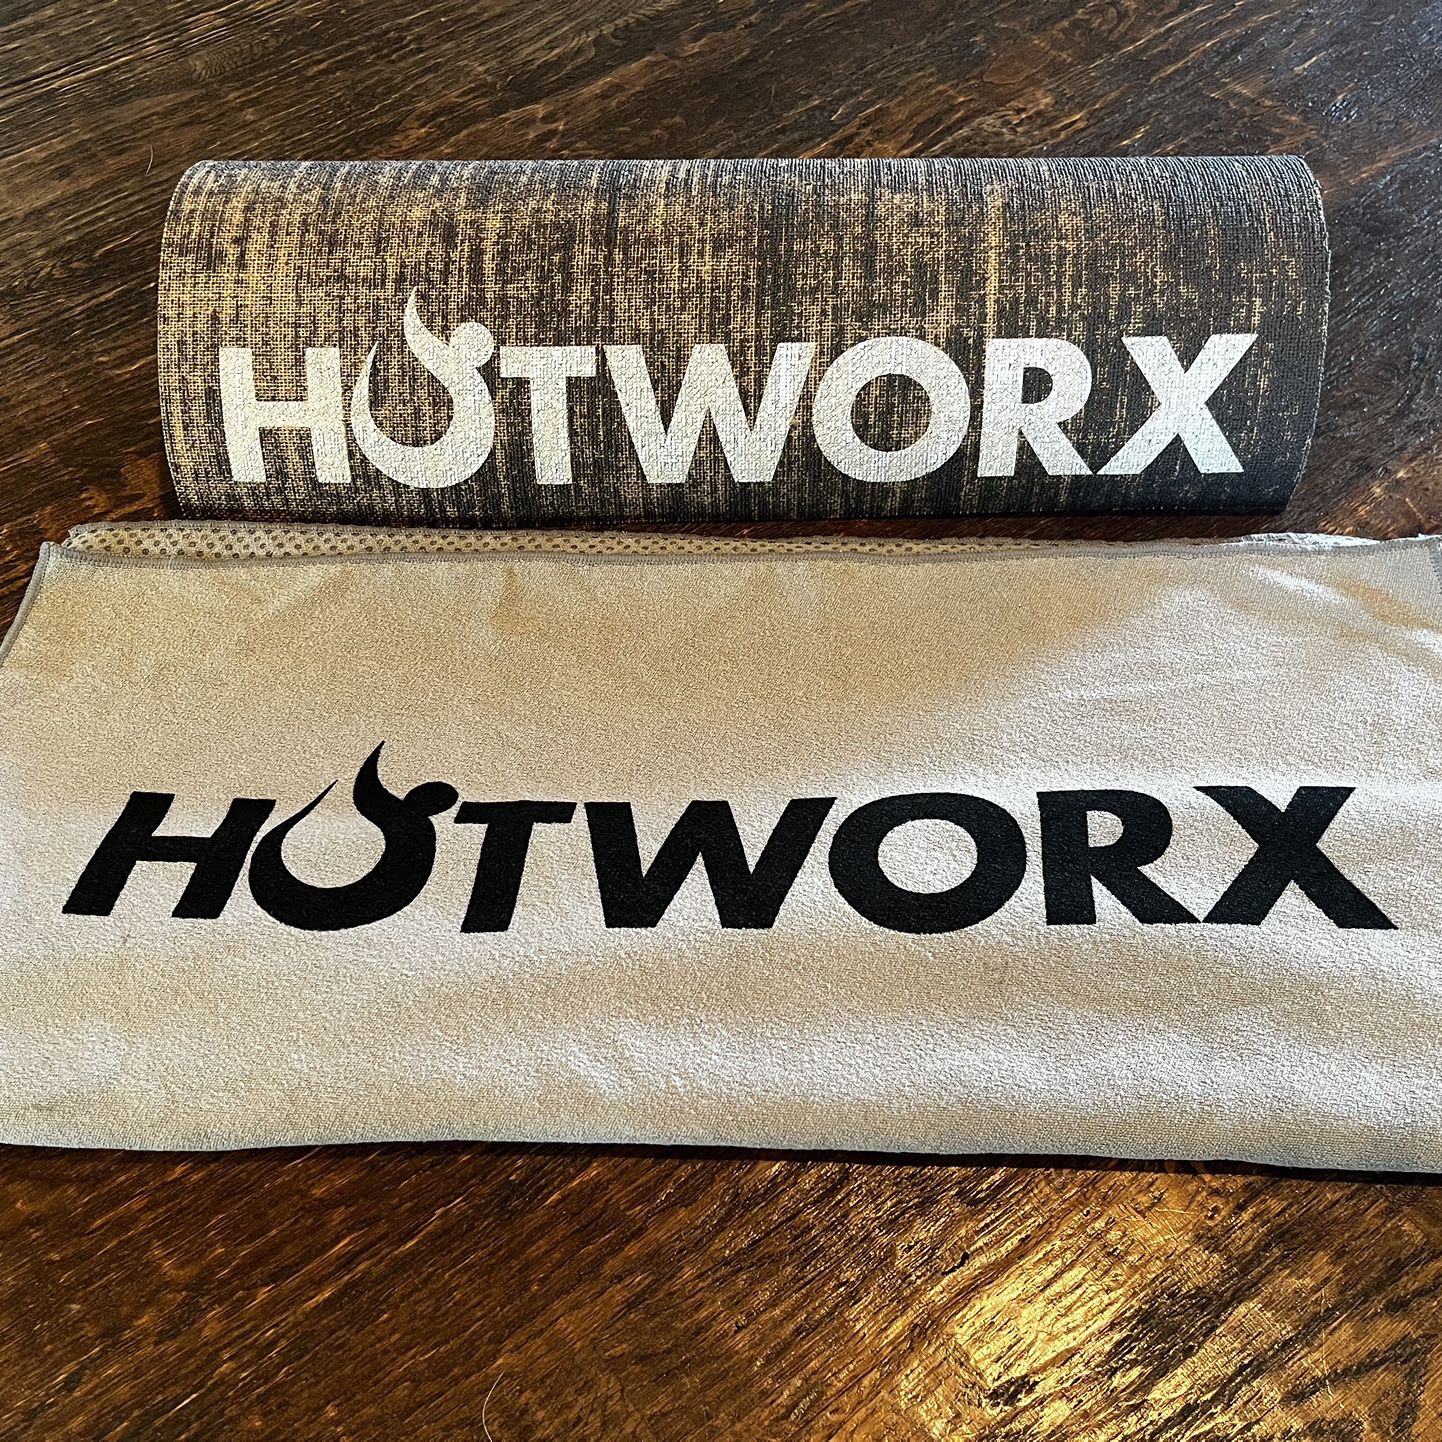 HotWorx Yoga Mat & Towel for Sale in Fairview, TX - OfferUp